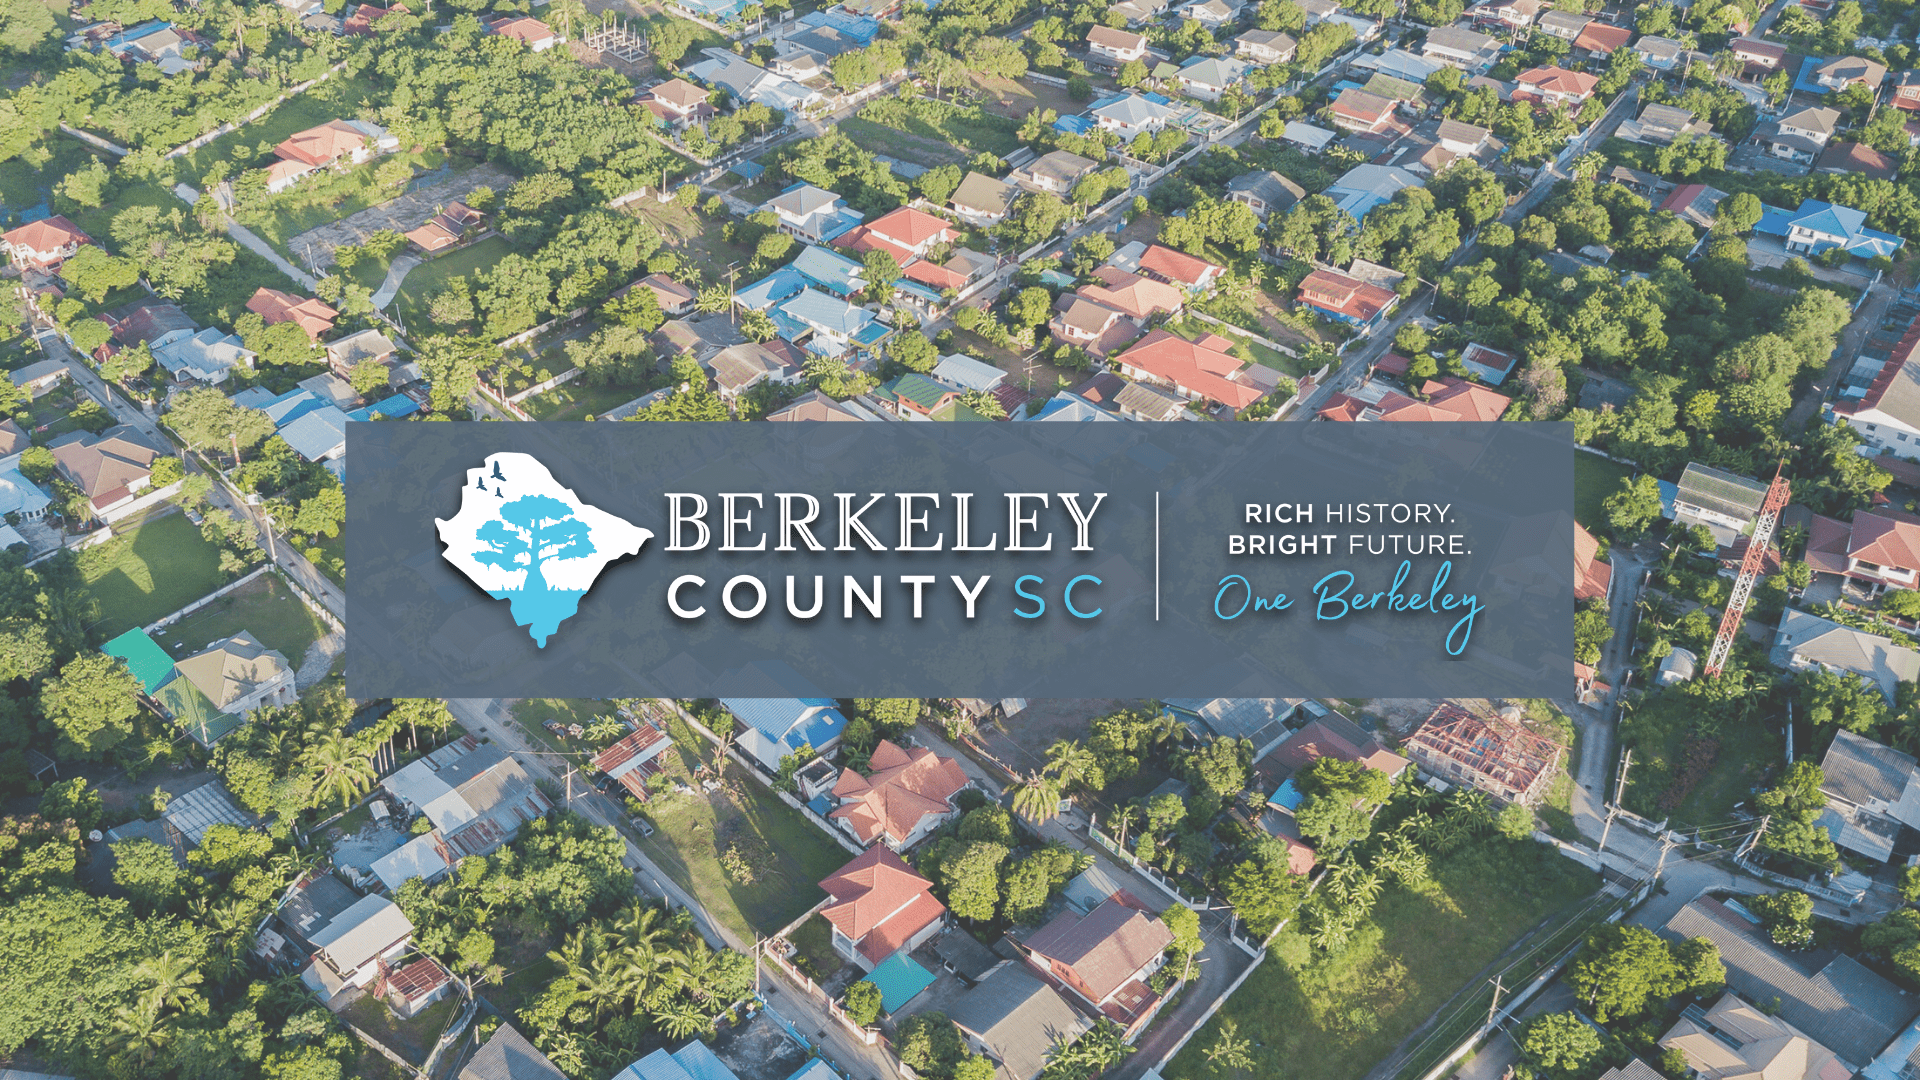 Berkeley County Council Passes Redistricting Plan Reflecting Population Growth